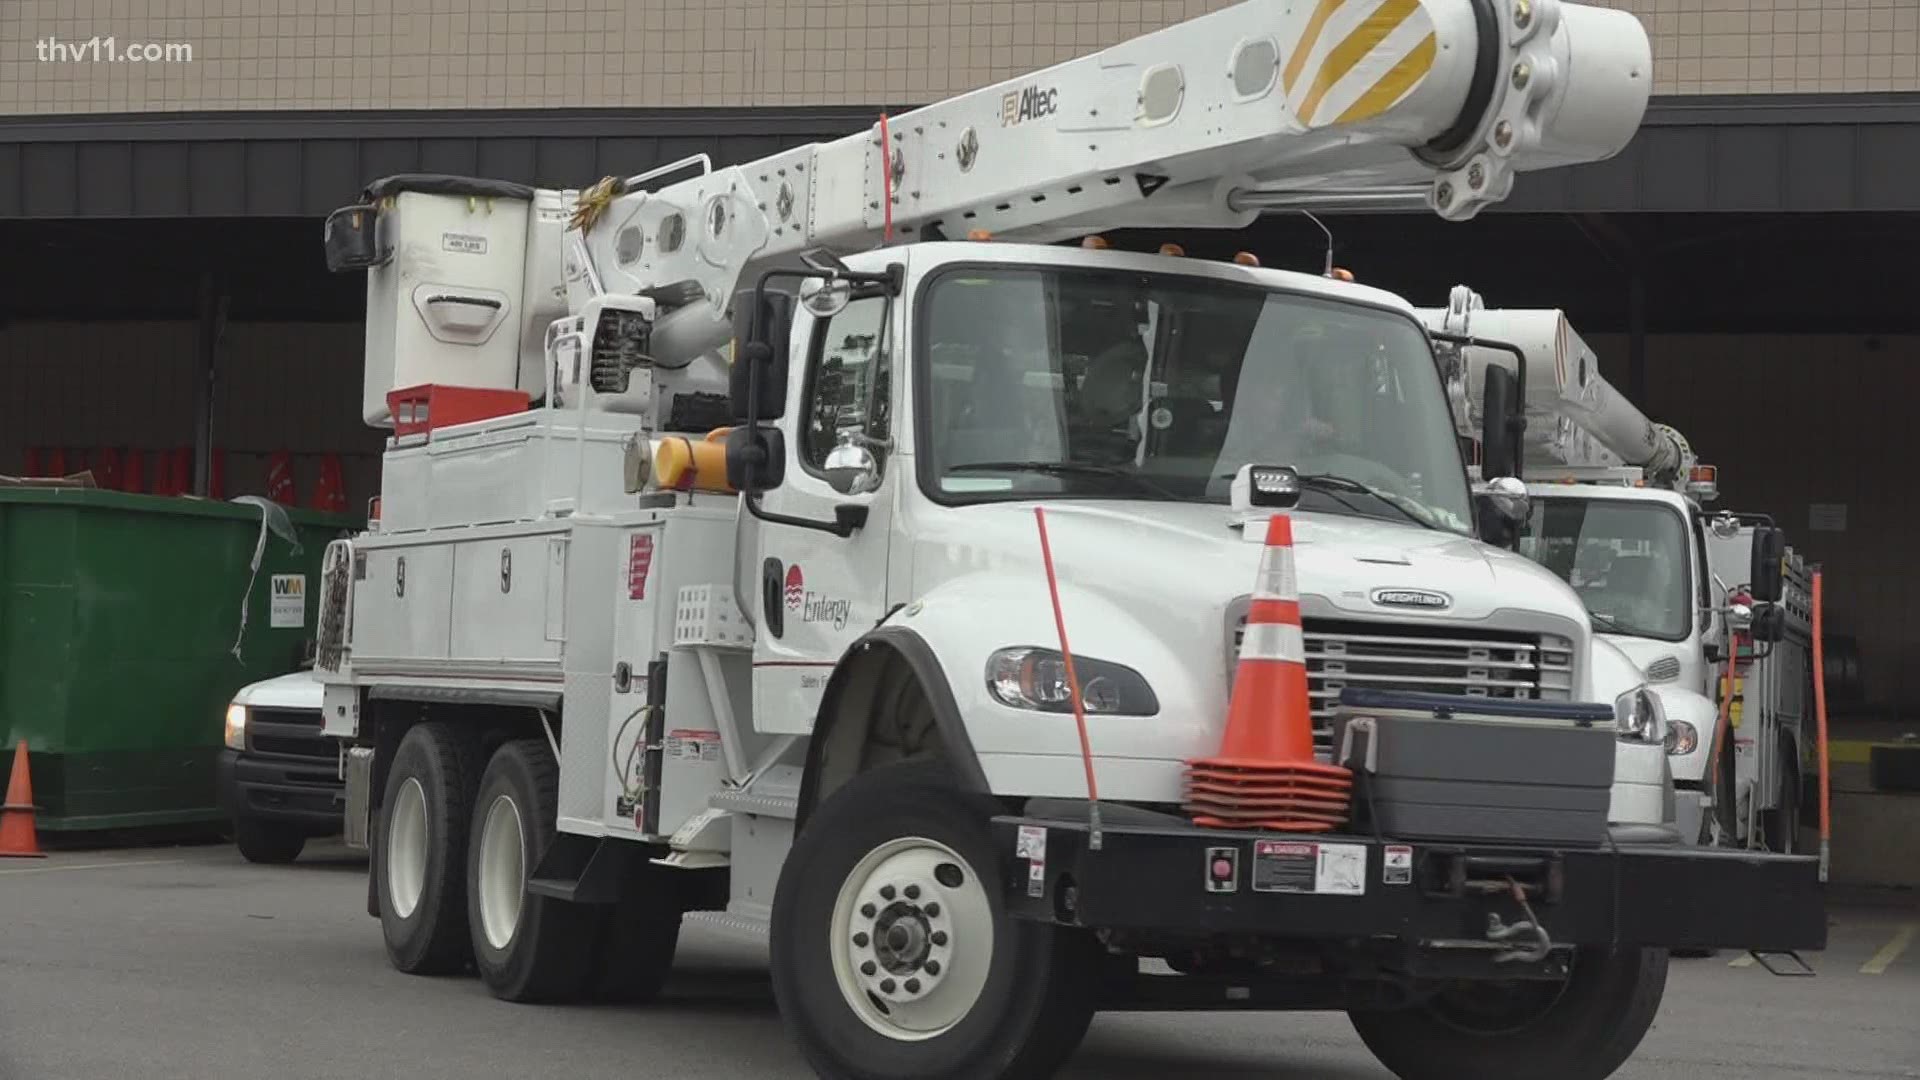 Entergy crews are preparing for mass power outages across central and southern Arkansas Thursday.